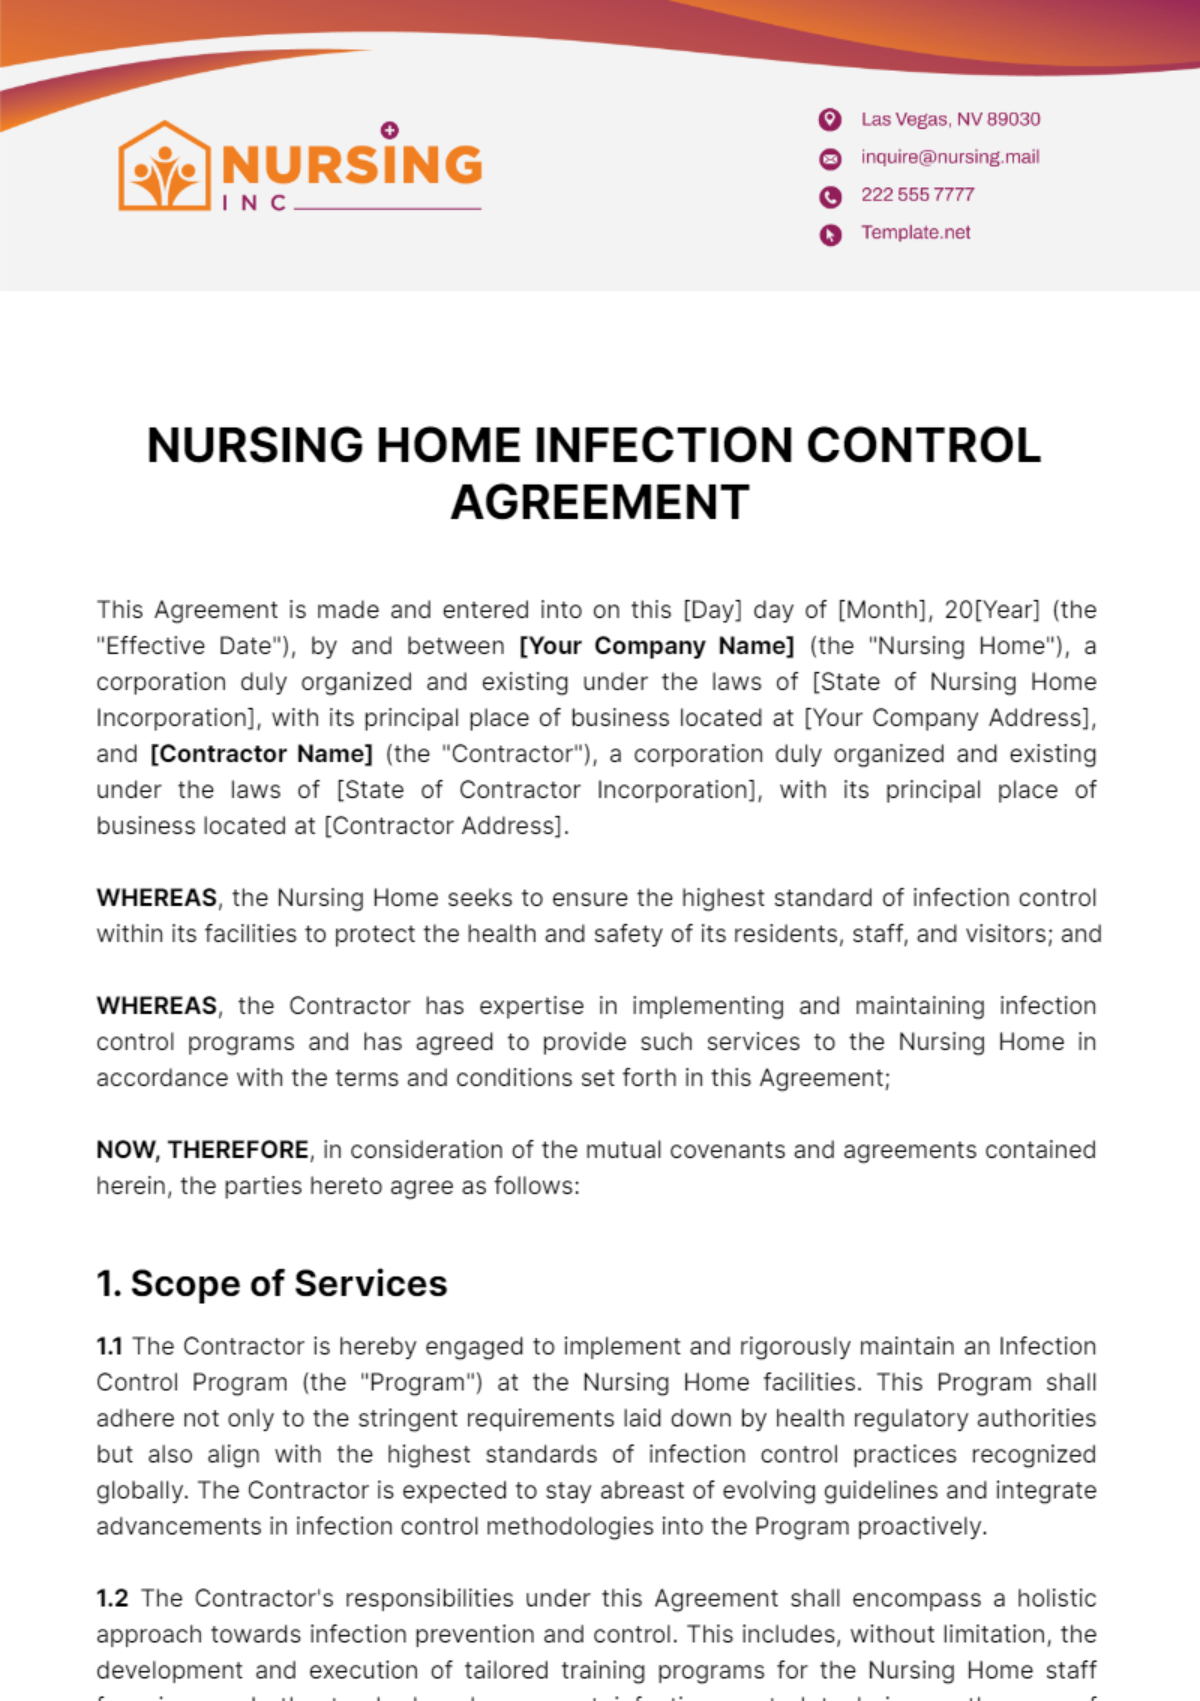 Nursing Home Infection Control Agreement Template